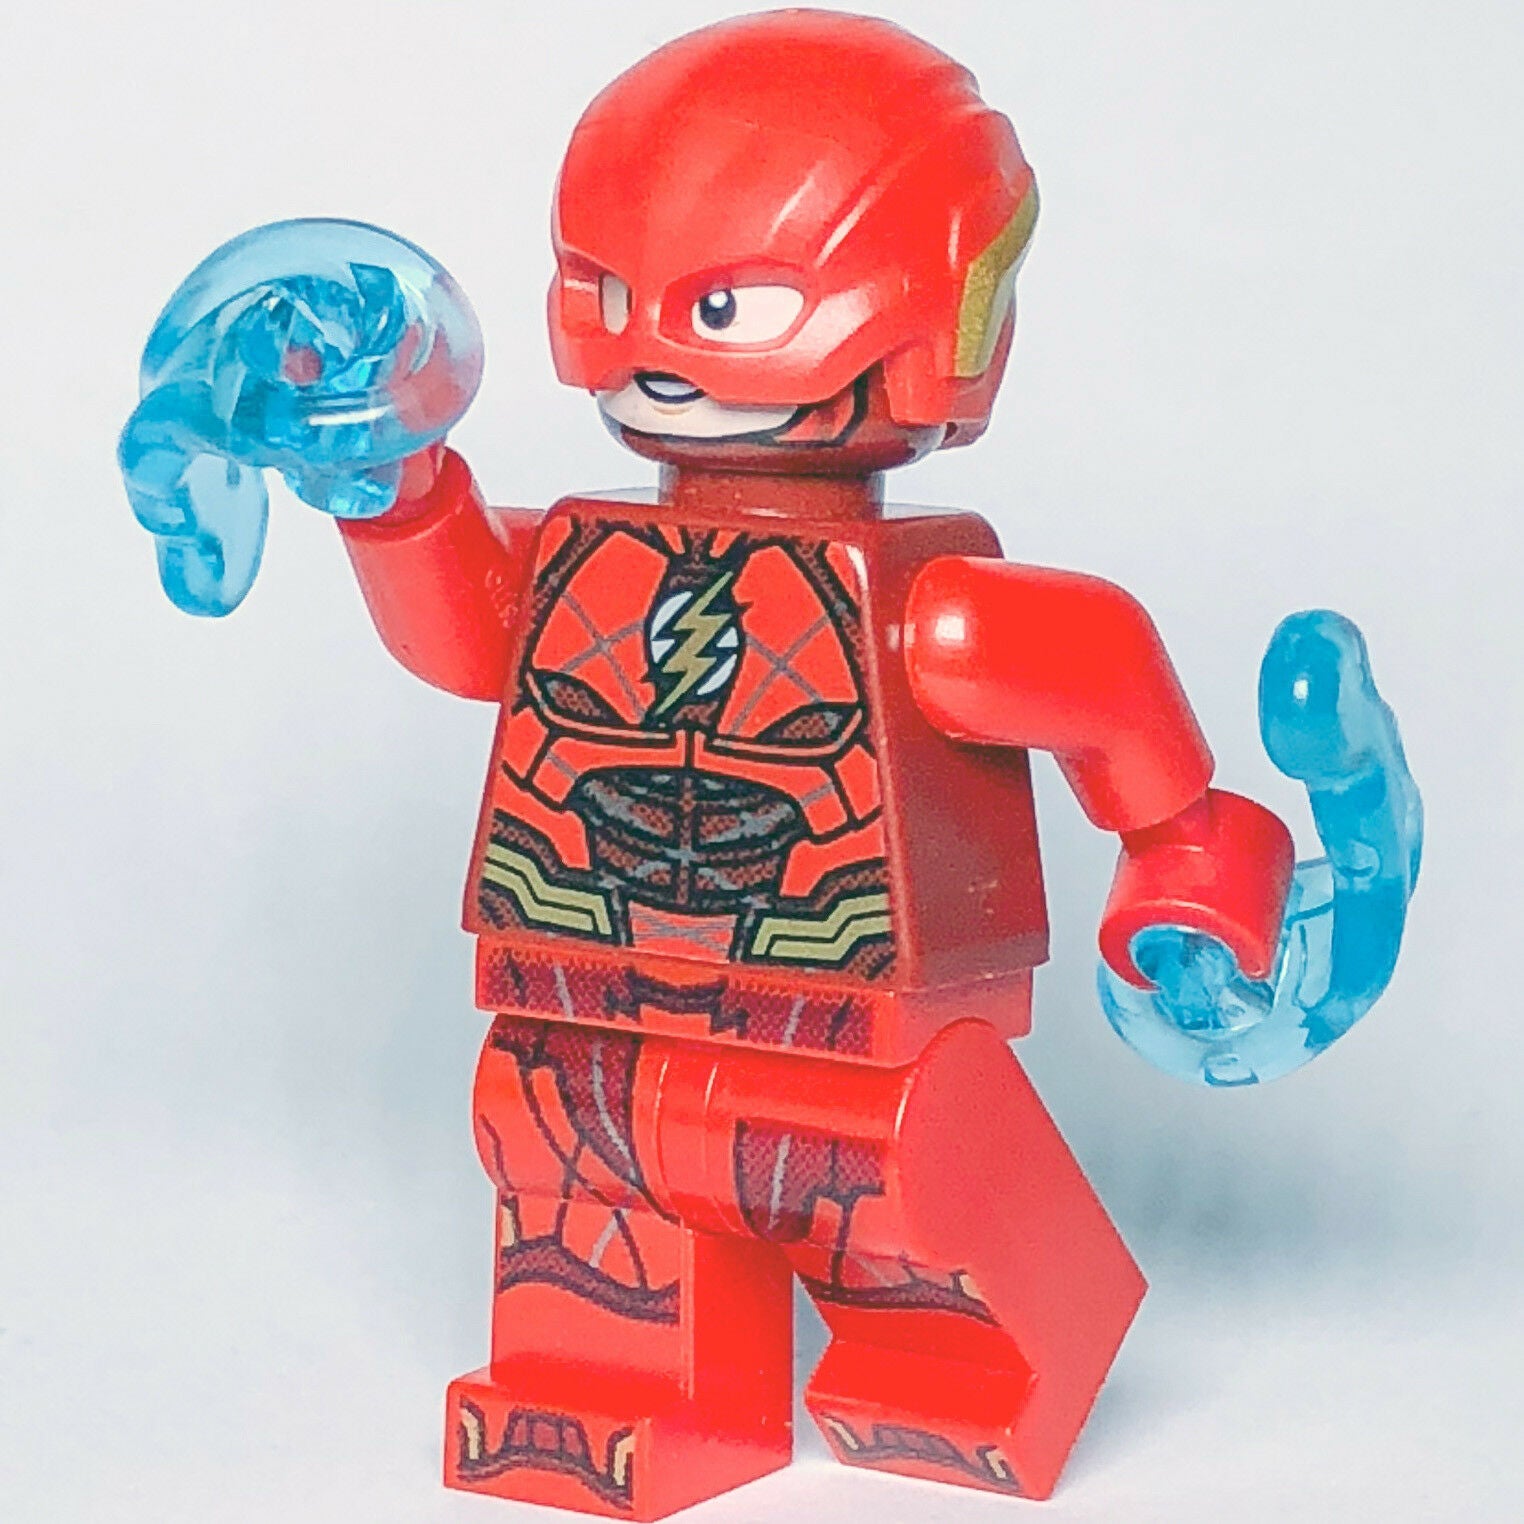 DC Super Heroes LEGO The Flash Justice League Minifigure from set 76086 - Bricks & Figures